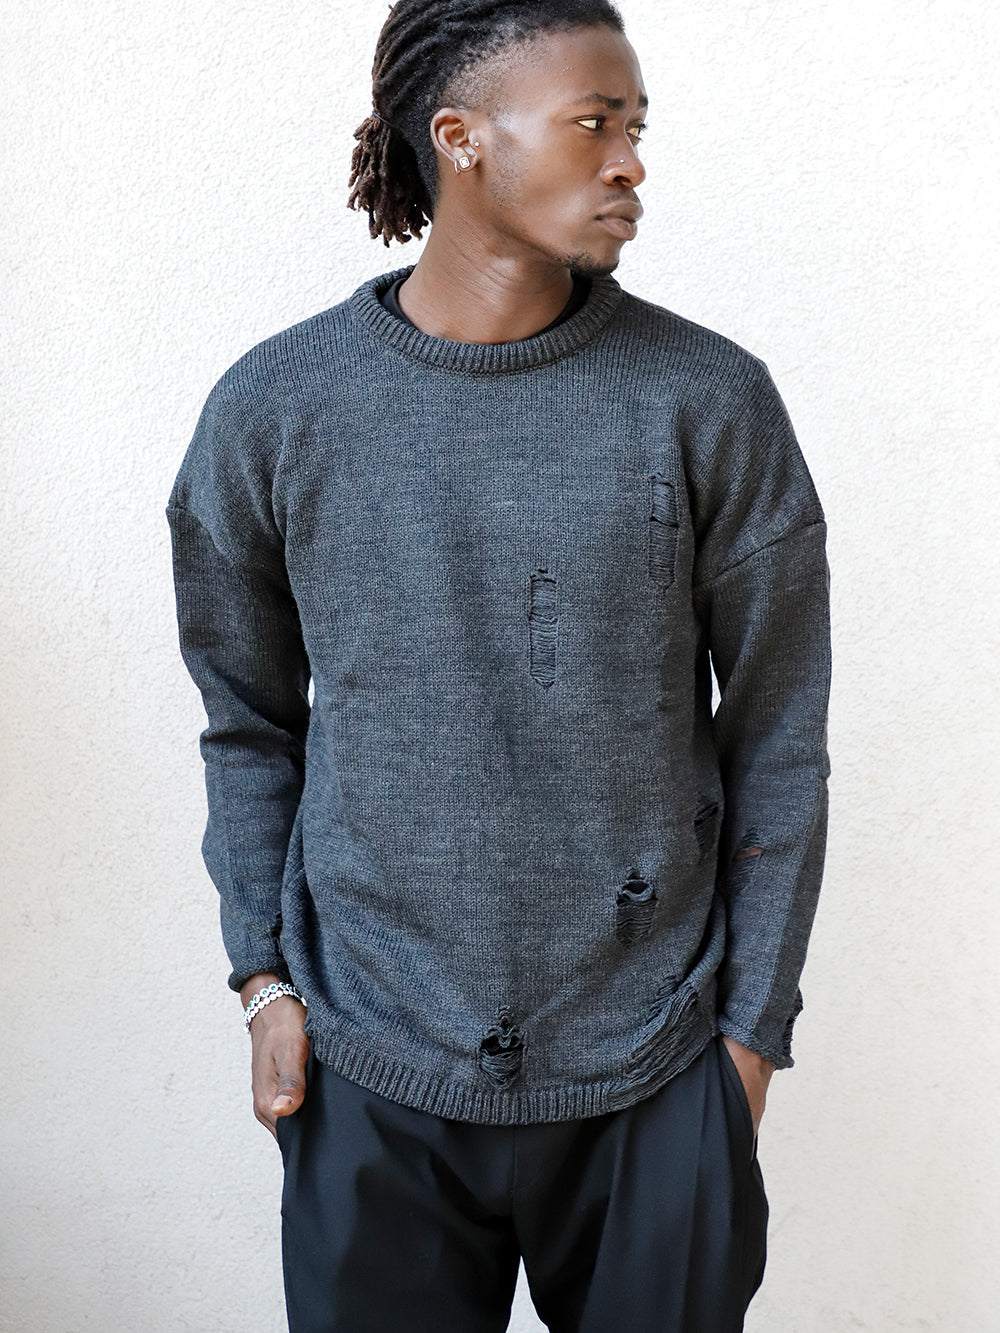 A man donning a DISTRESSED GENTLEMAN SWEATER | CHARCOAL and black pants with a soft feel.